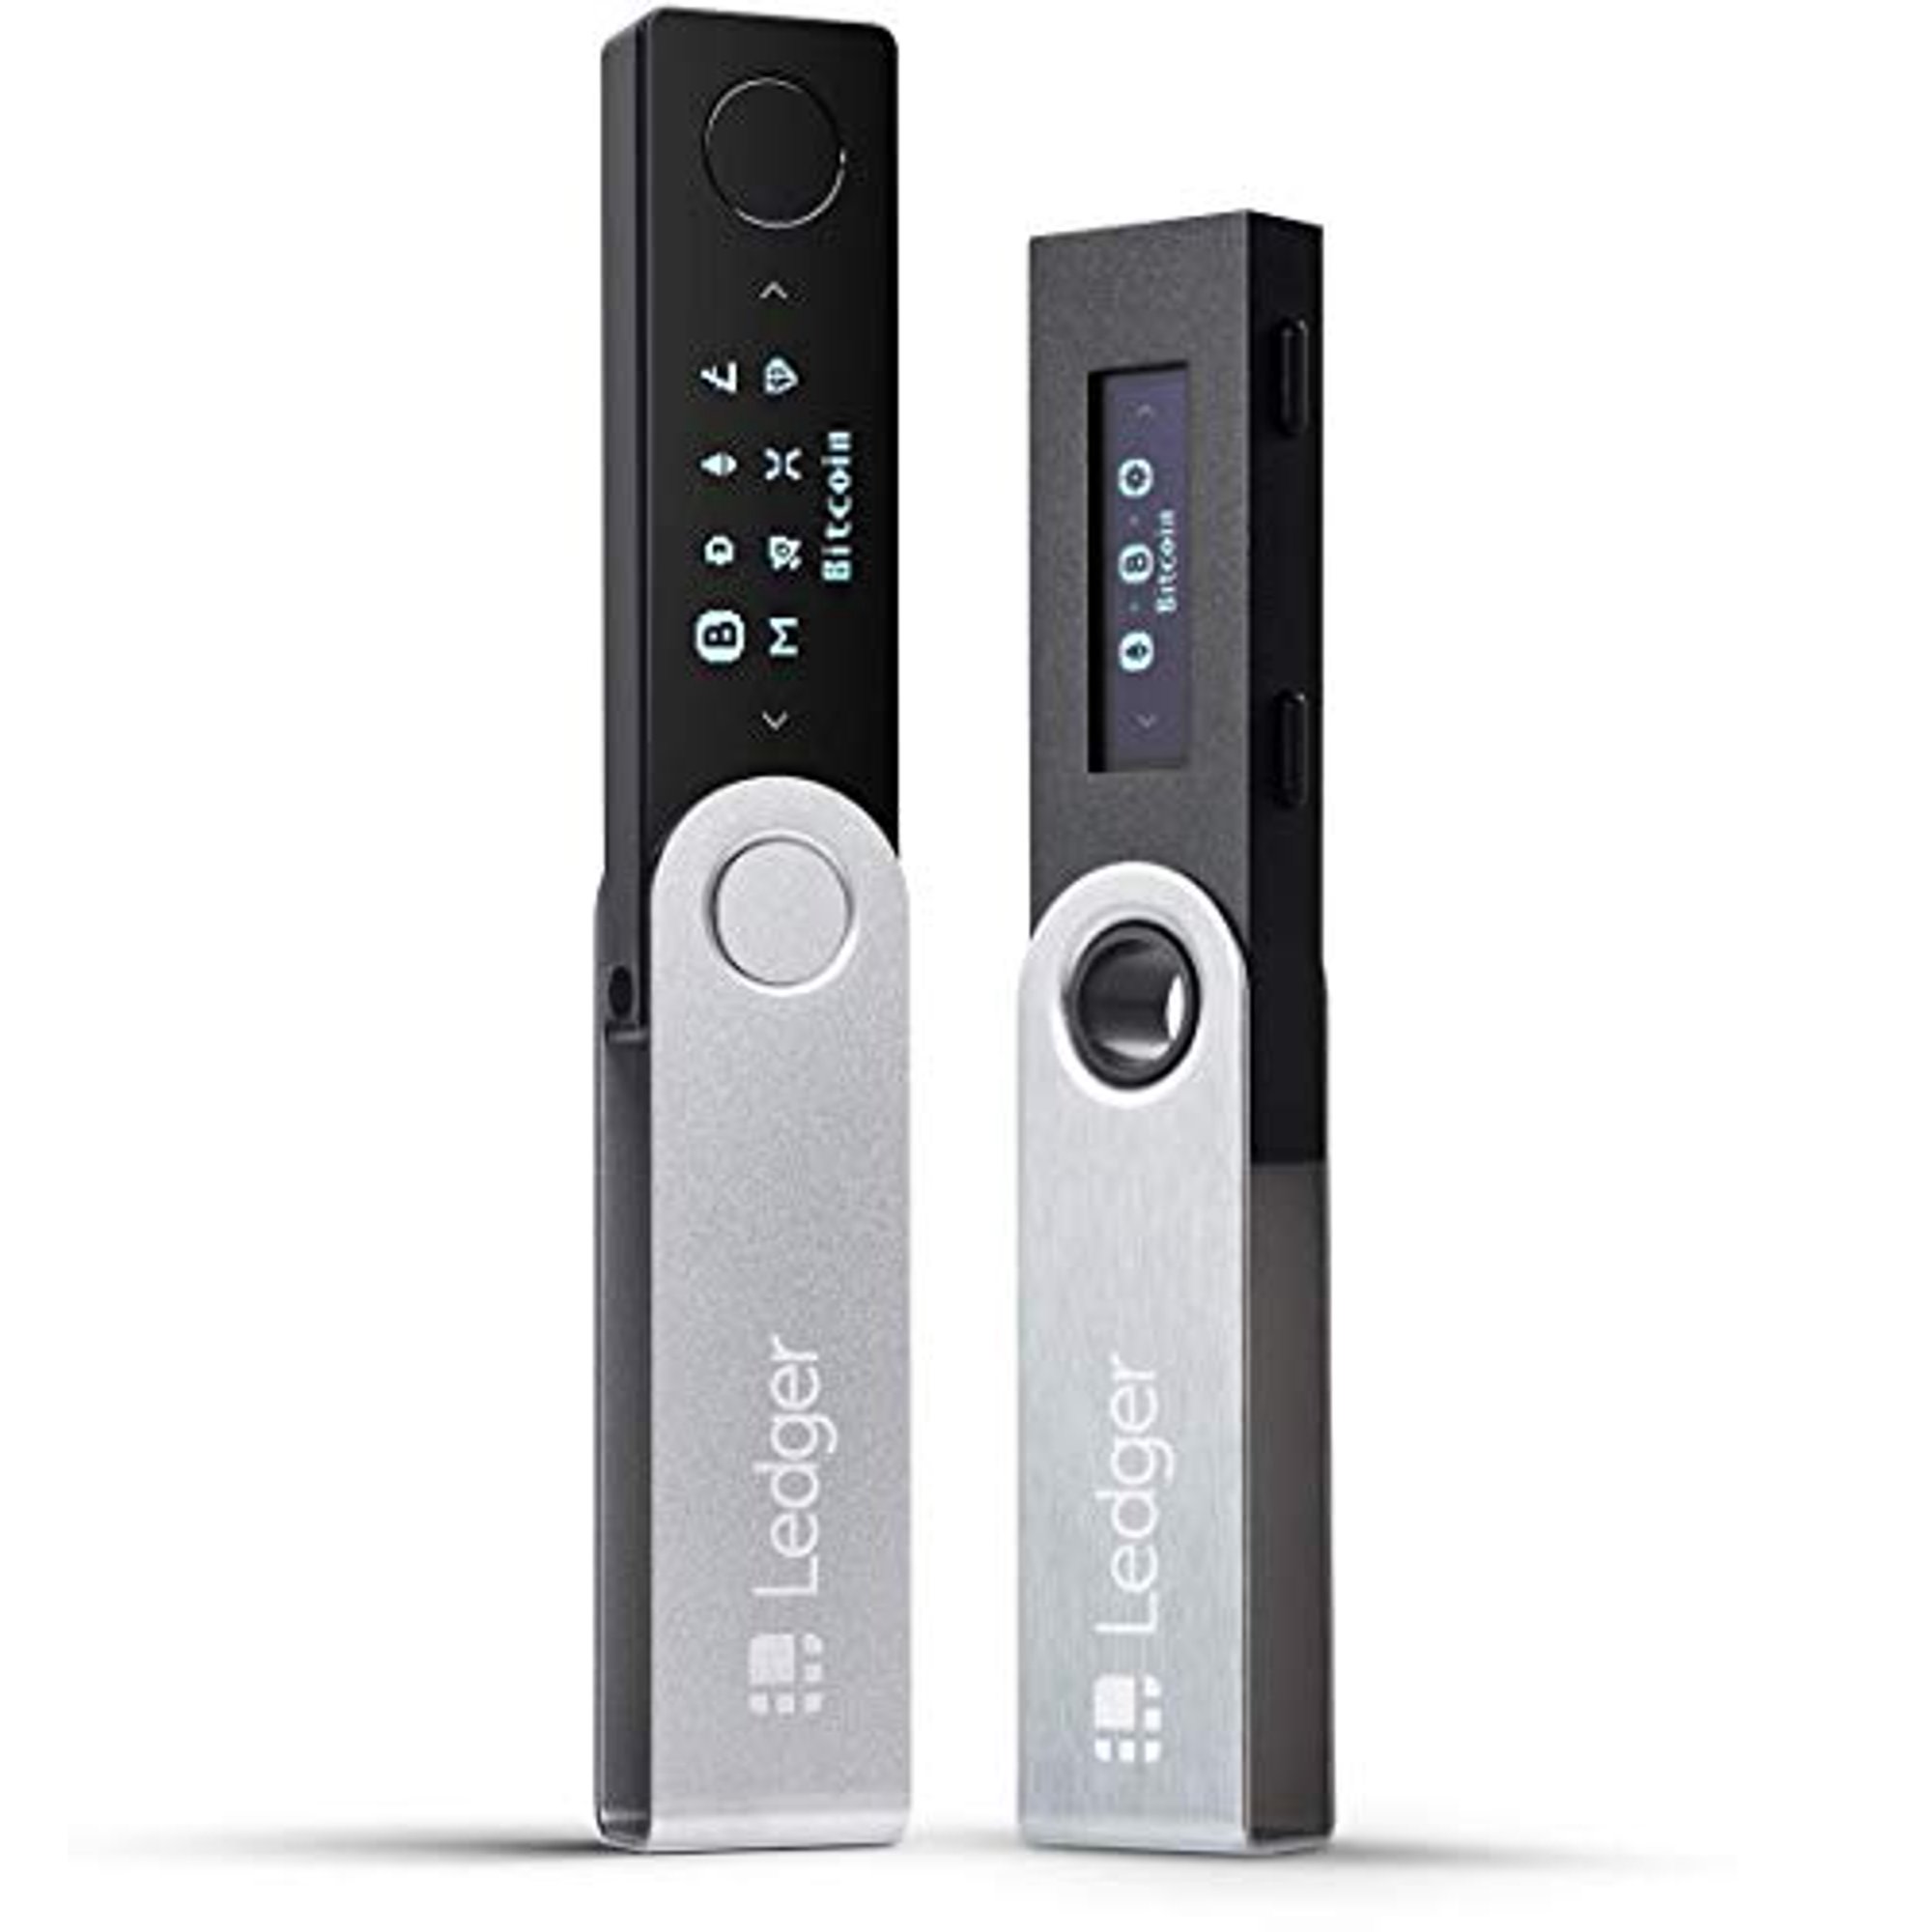 Trezor vs. Ledger: Which Should You Get? Update | bitcoinhelp.fun